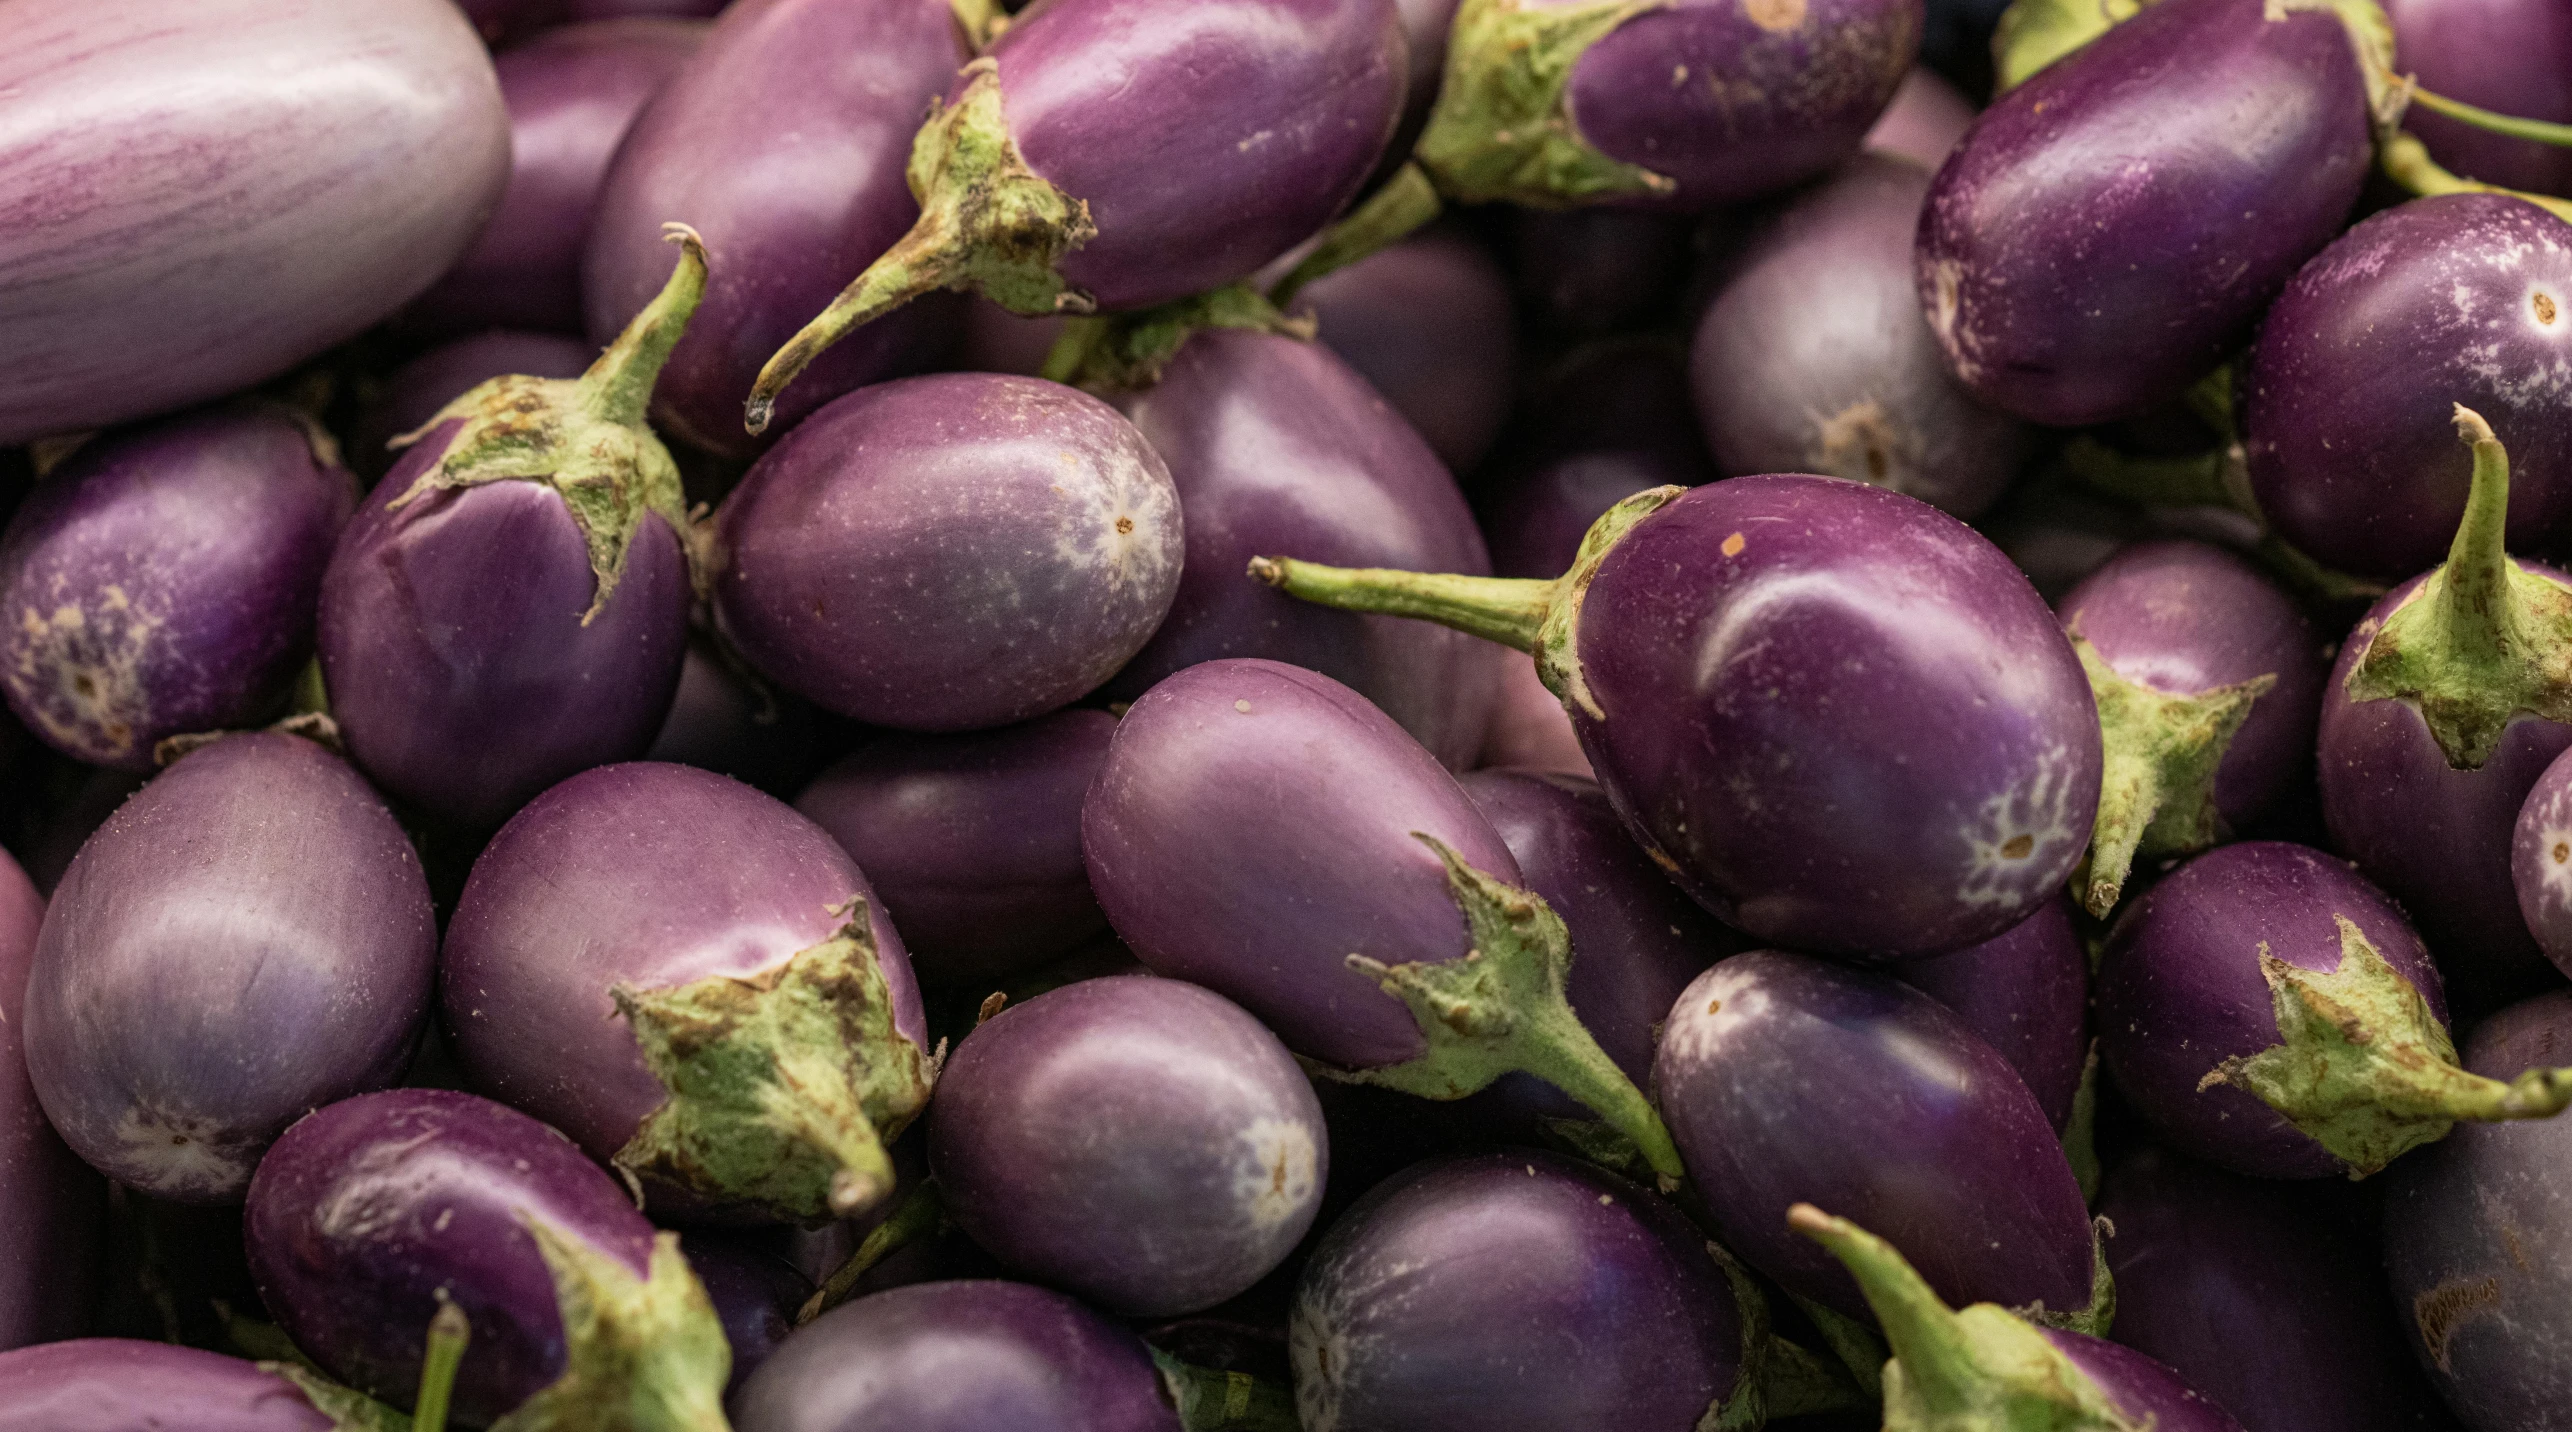 purple eggplants stacked on top of each other